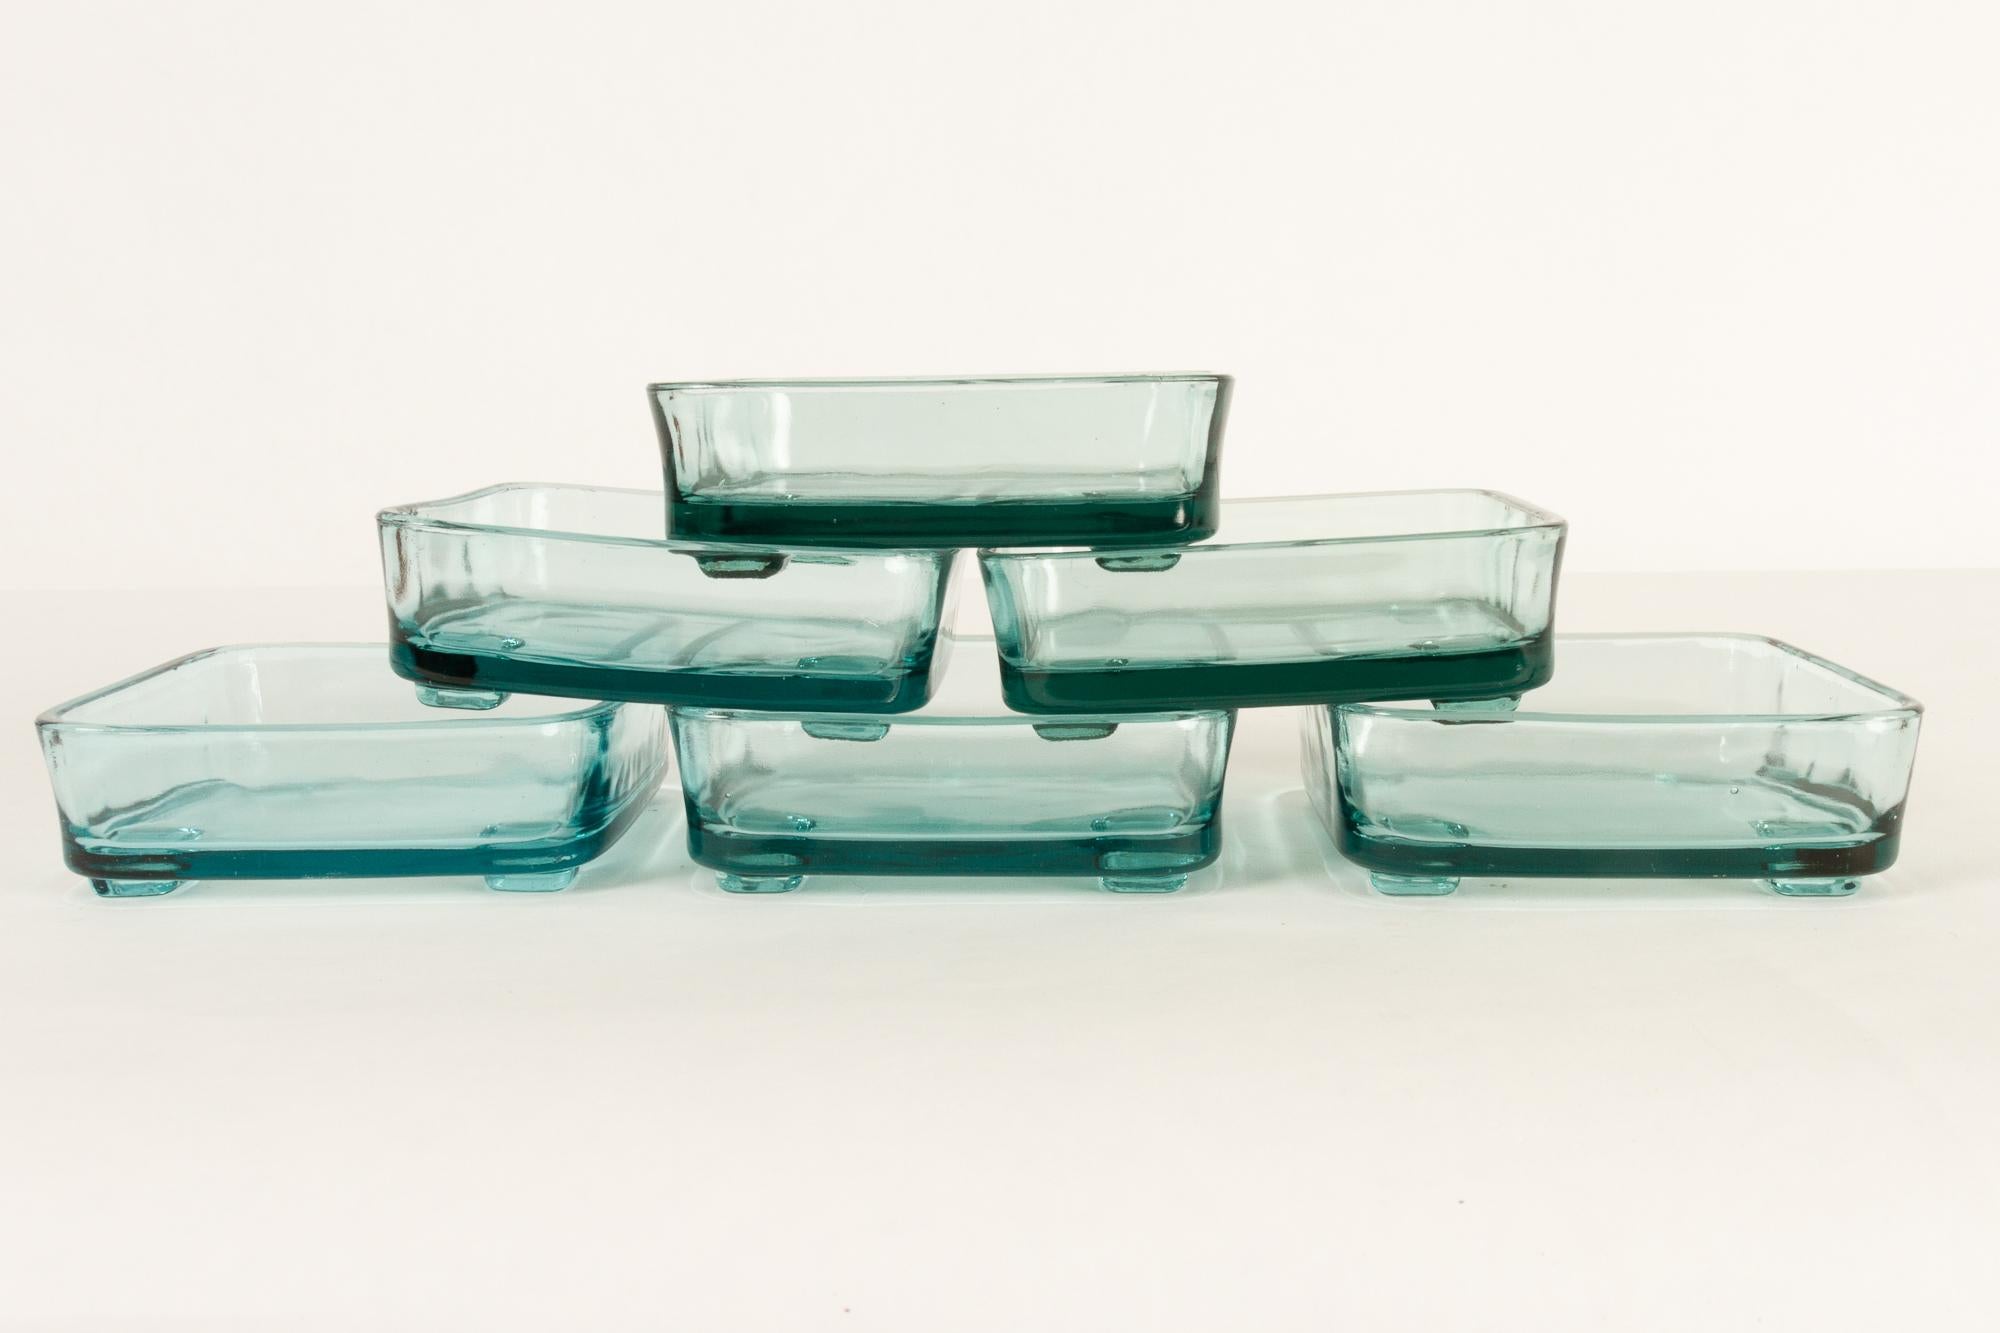 Vintage Danish Teak Tray with Glass Bowls by Jens Harald Quistgaard, 1960s 3